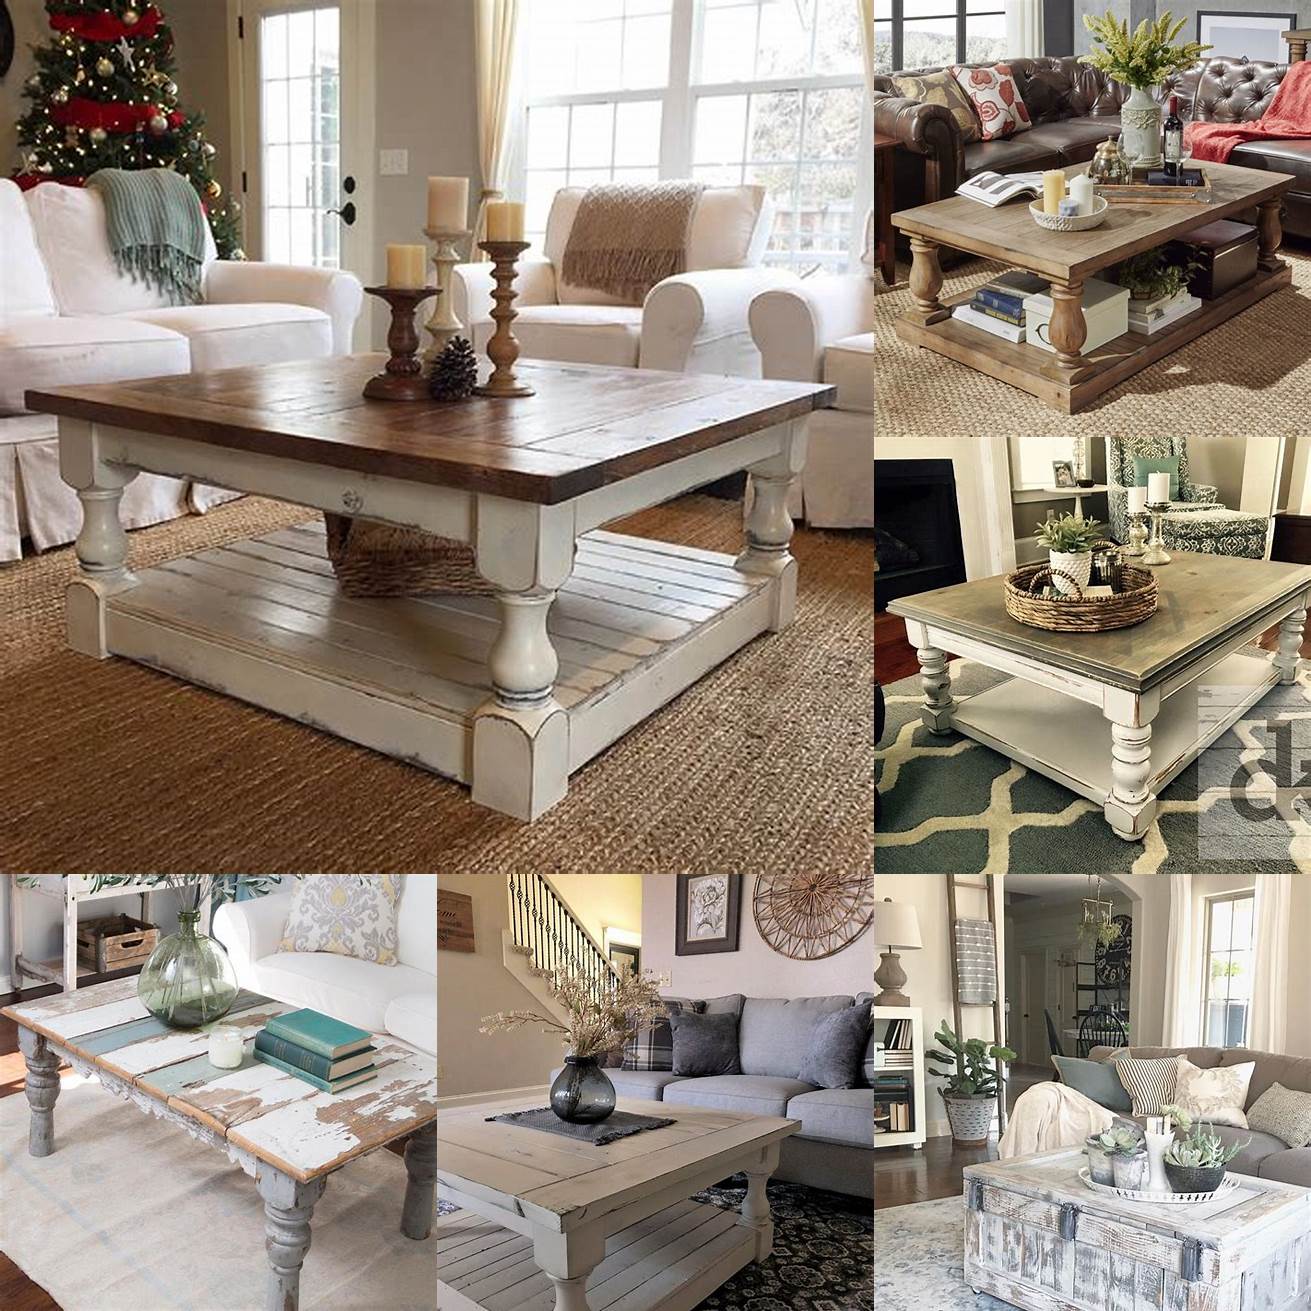 Use a distressed coffee table as the centerpiece of your living room